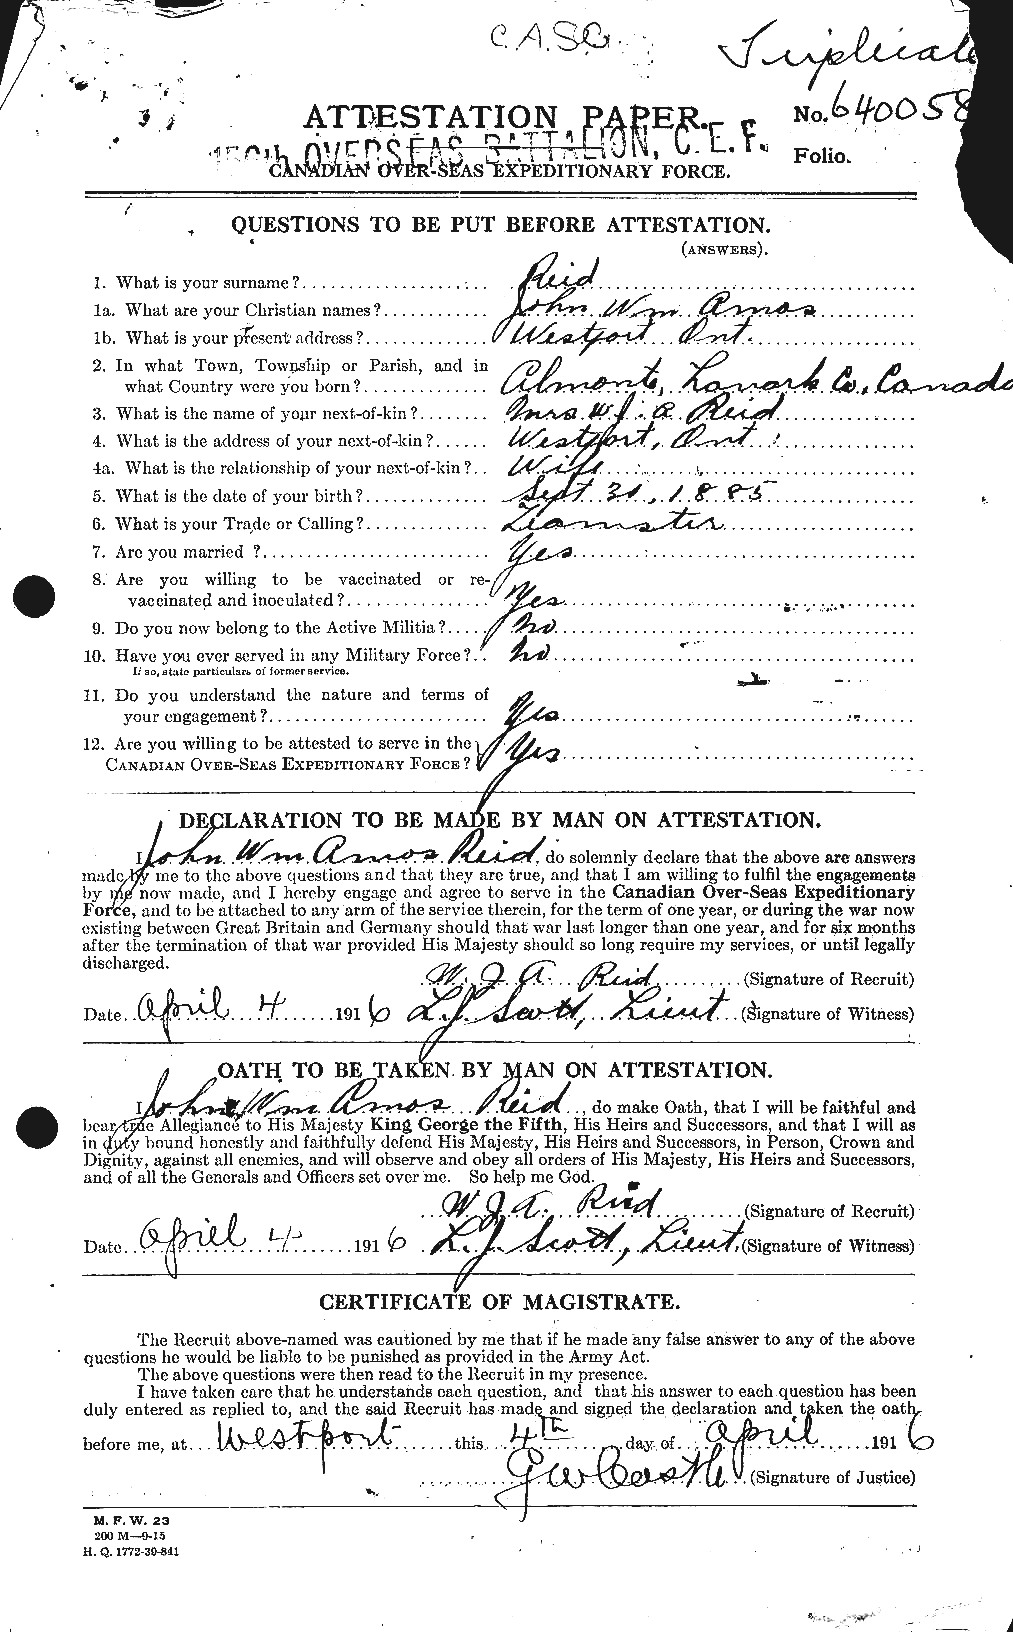 Personnel Records of the First World War - CEF 598887a